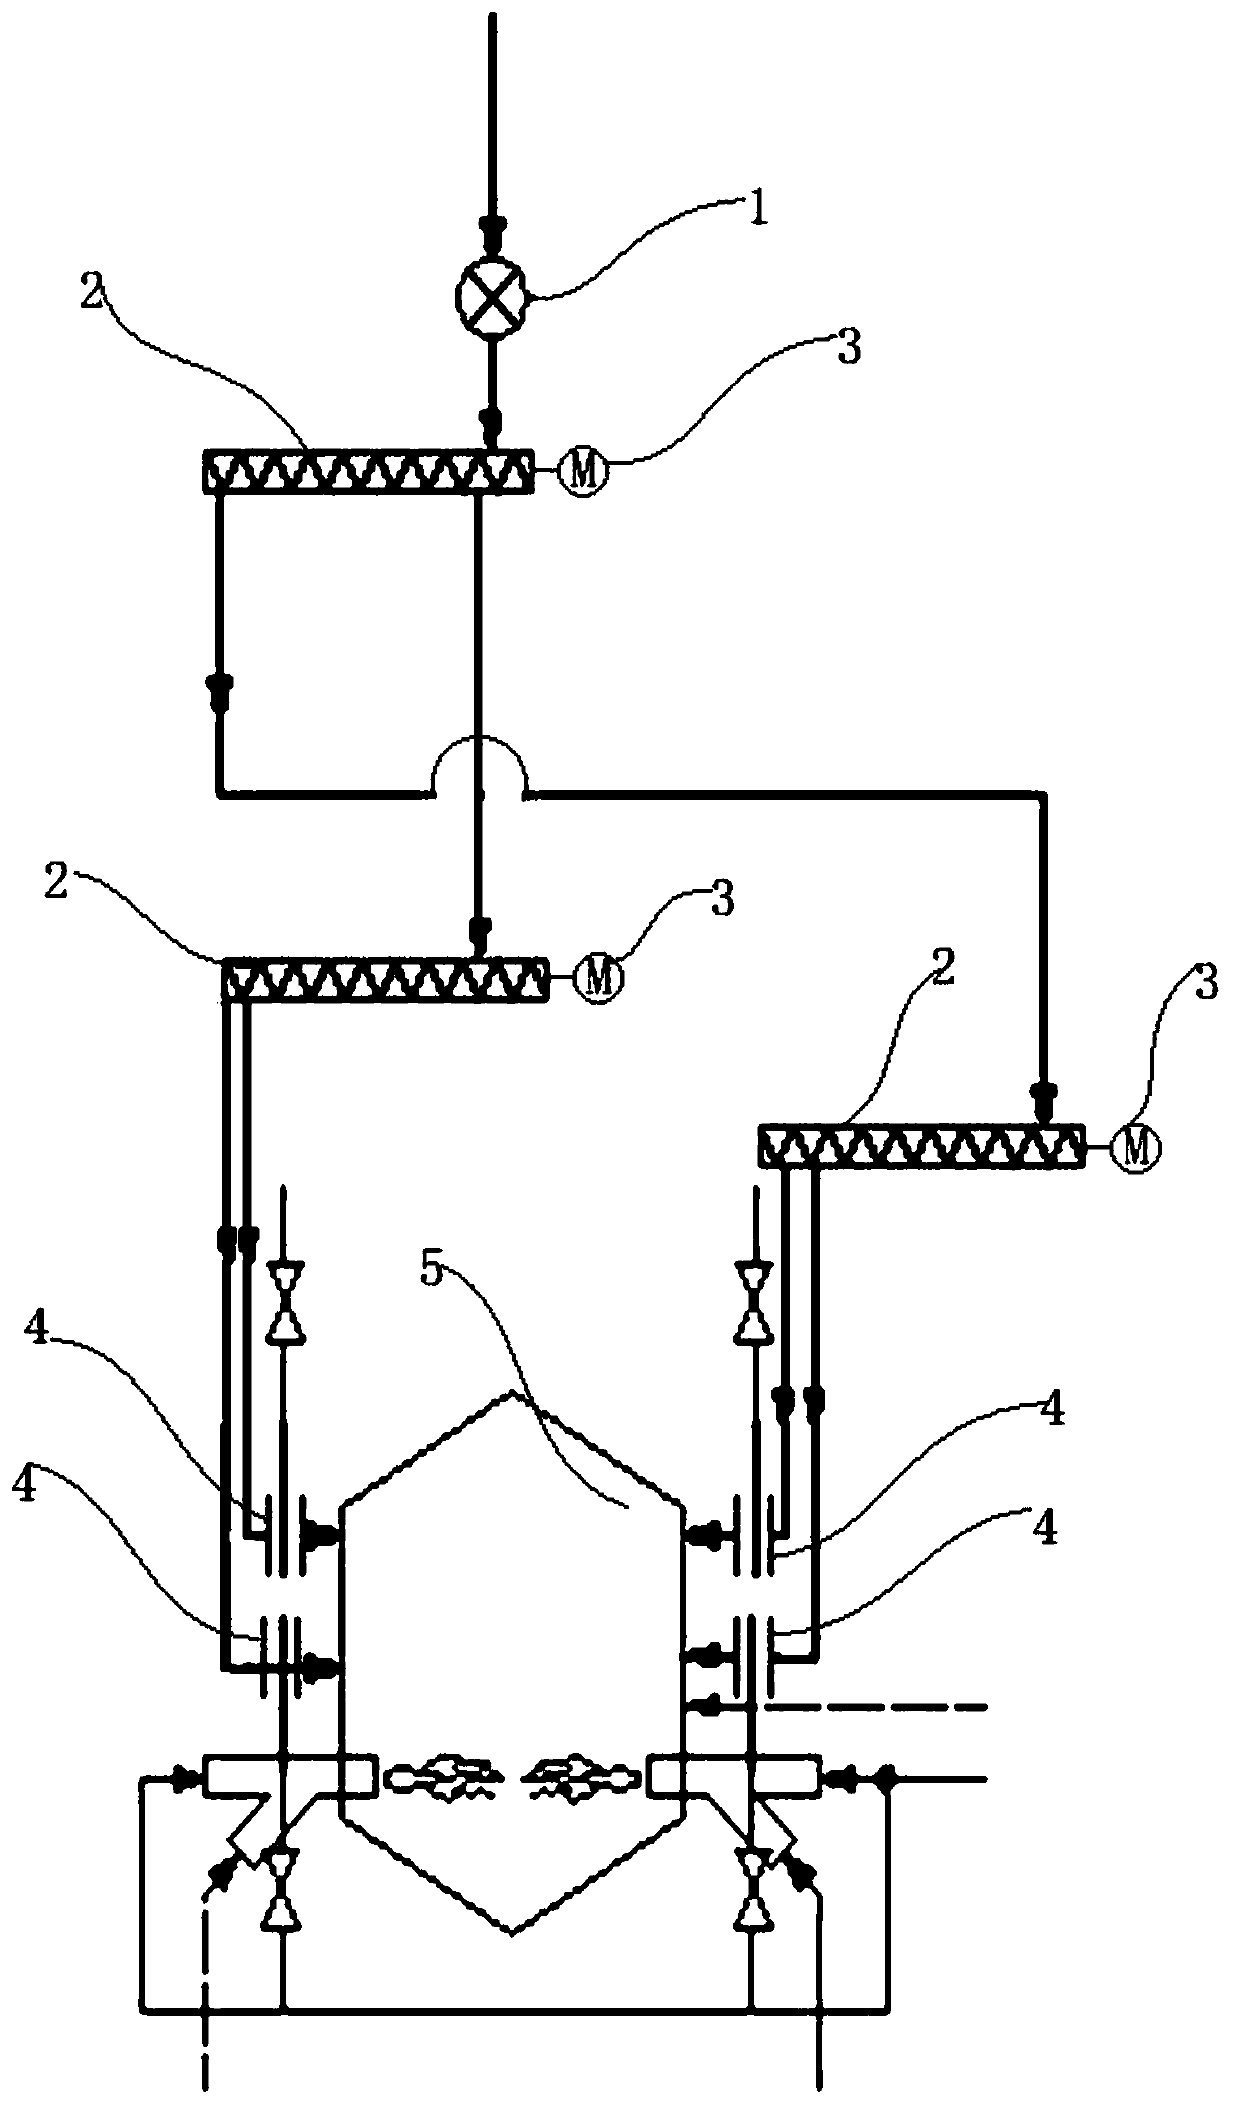 Multi-point feeding system for coordinated disposal of refuse derived fuel (RDF) by cement kiln